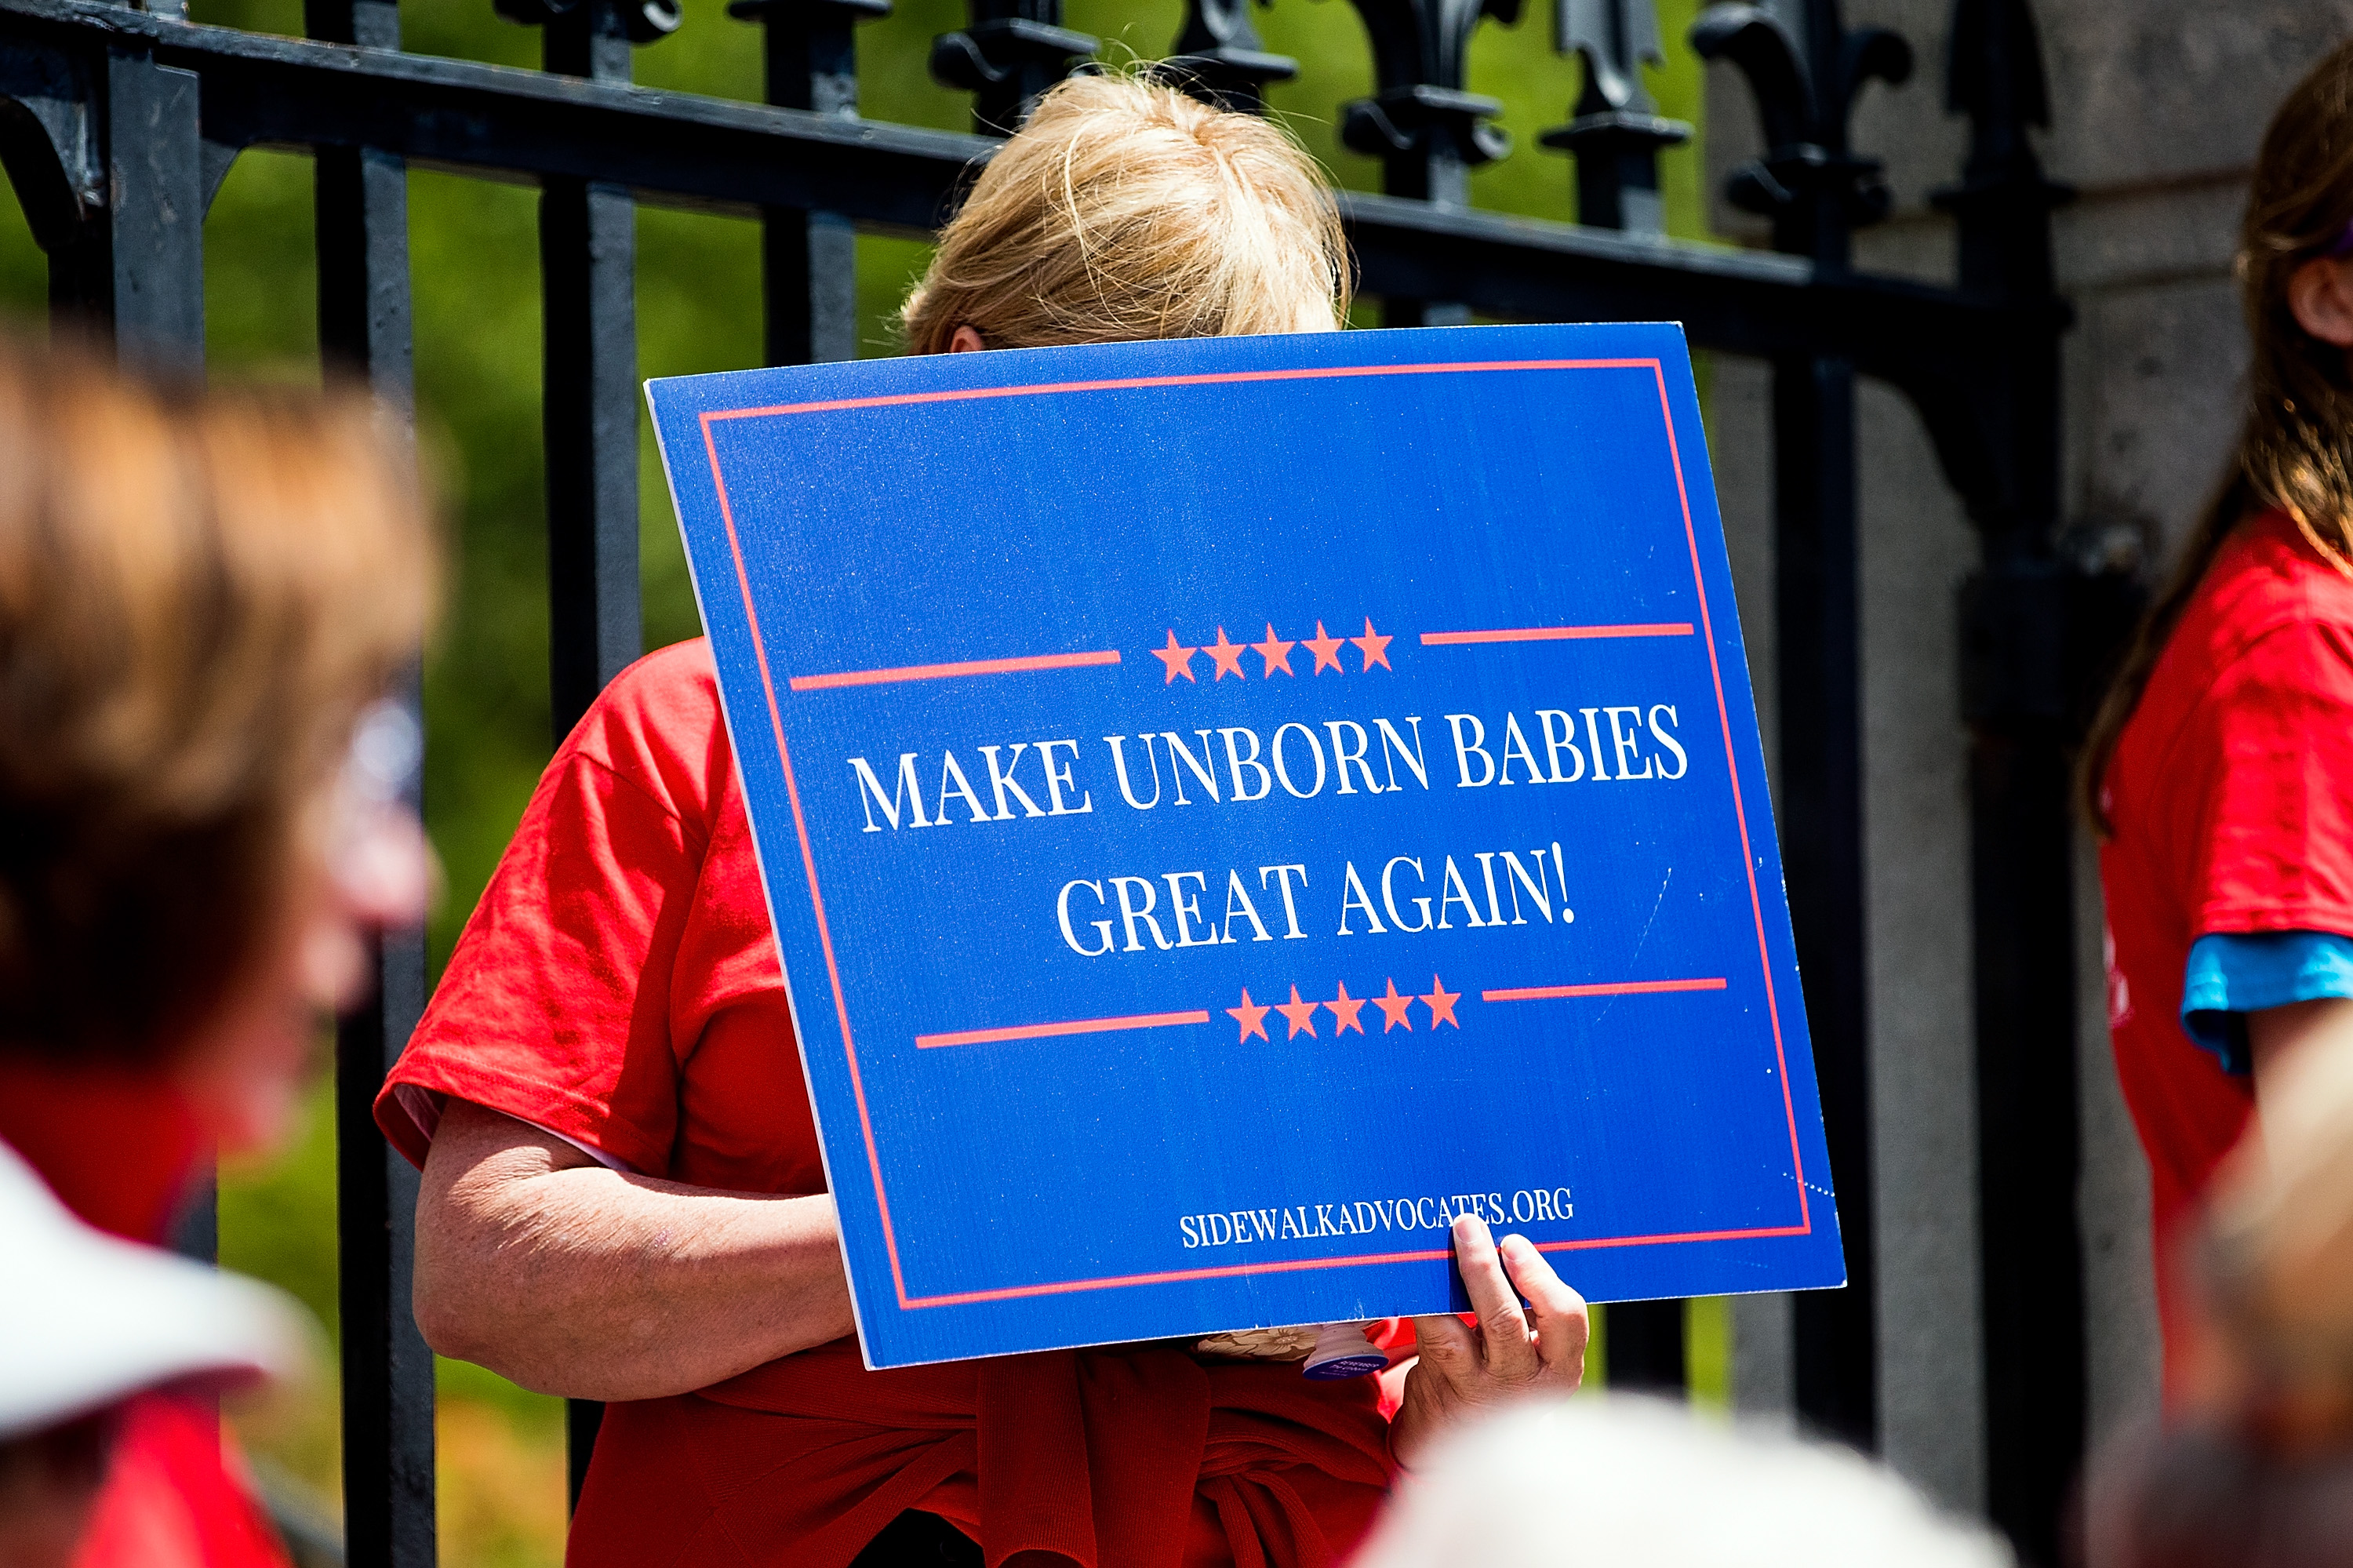 BOSTON, MA - JUNE 17: Members of Massachusetts Citizens for Life hold a rally outside the Massachusetts Statehouse on June 17, 2019 in Boston, Massachusetts. Opposing activists were rallying in advance of consideration by lawmakers of measures aimed at loosening restrictions on abortion, including removing criminal penalties for those performed after 24 weeks as well as removing the requirement for parental-consent for pregnant girls under 18. (Photo by Adam Glanzman/Getty Images)